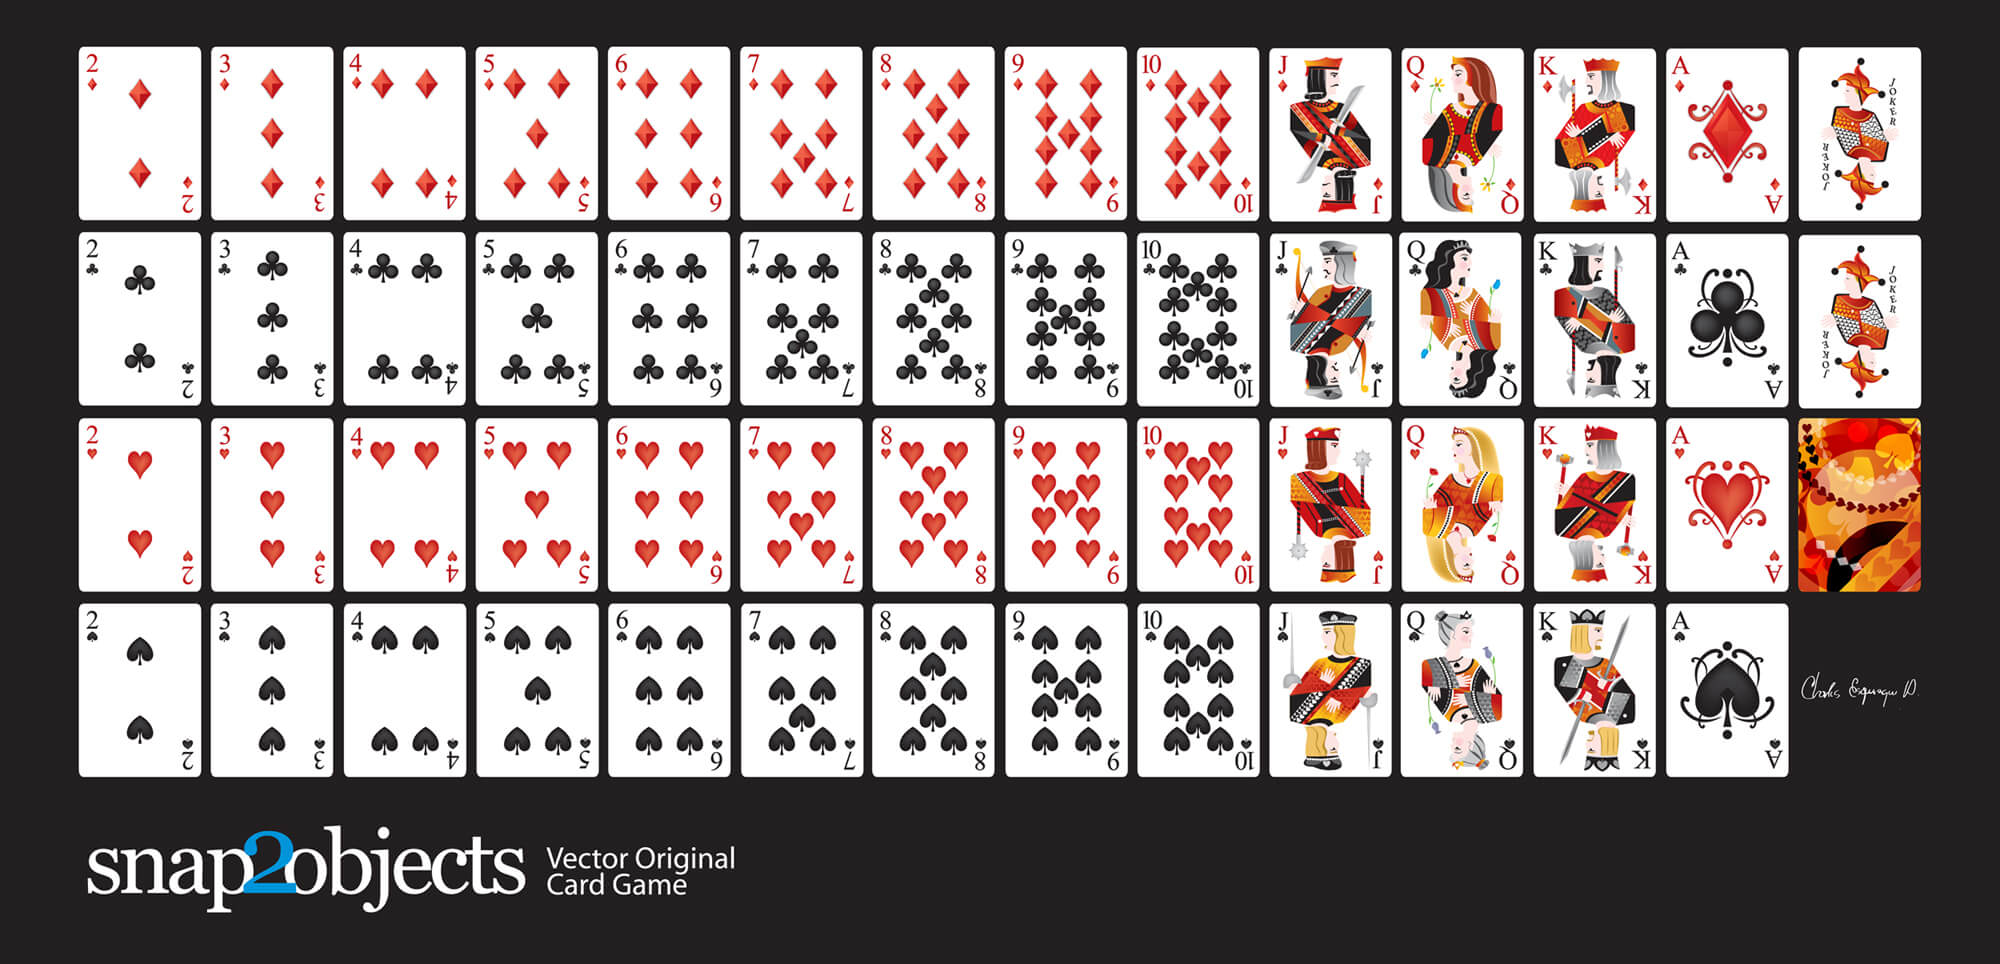 Playing Card Vector Art At Getdrawings | Free For For Playing Card Design Template